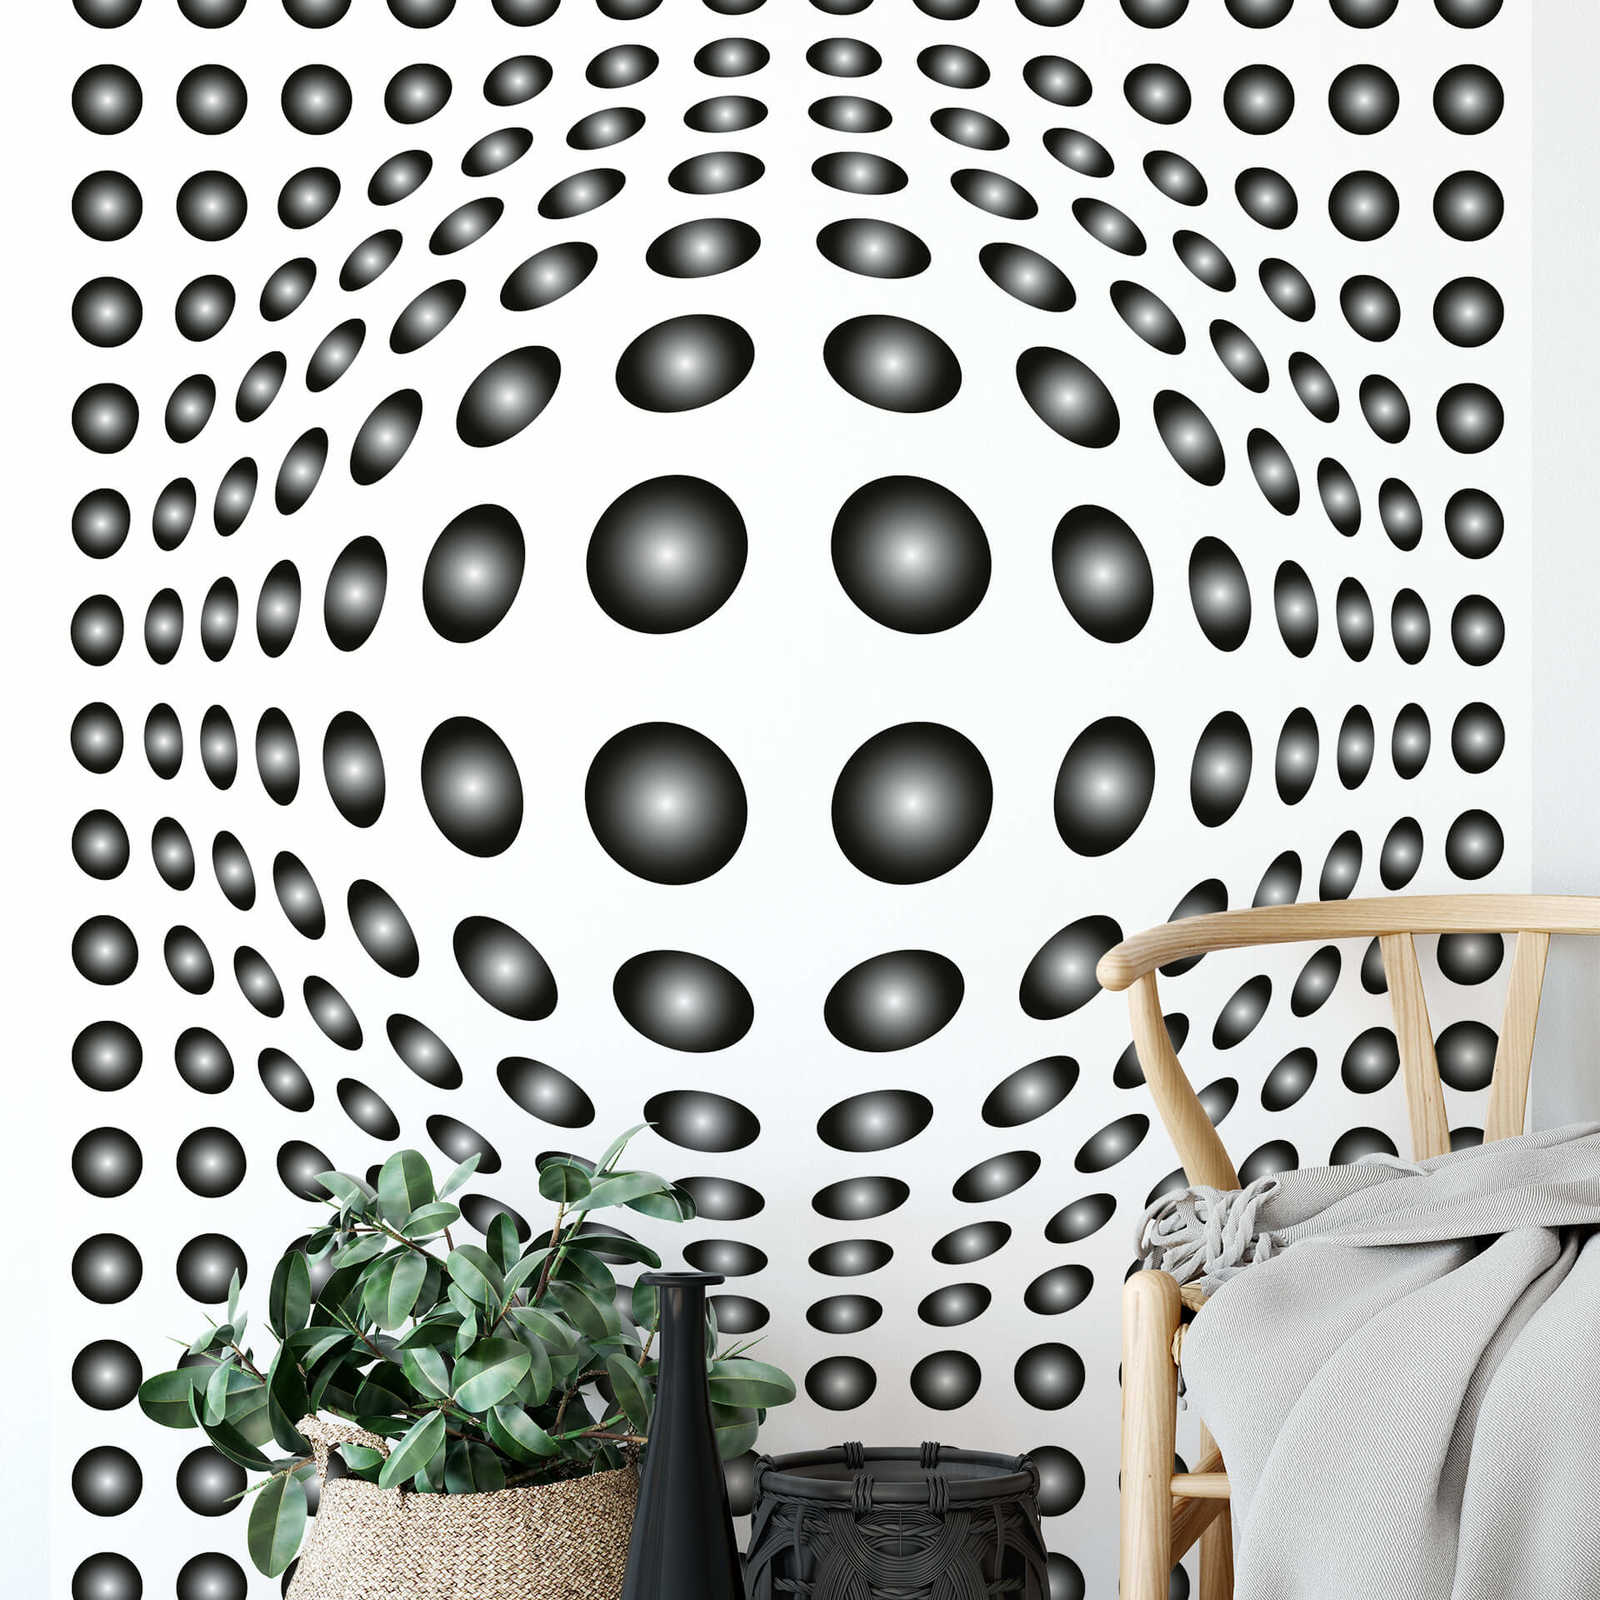             Black and white photo wallpaper with 3D dot pattern, portrait format
        